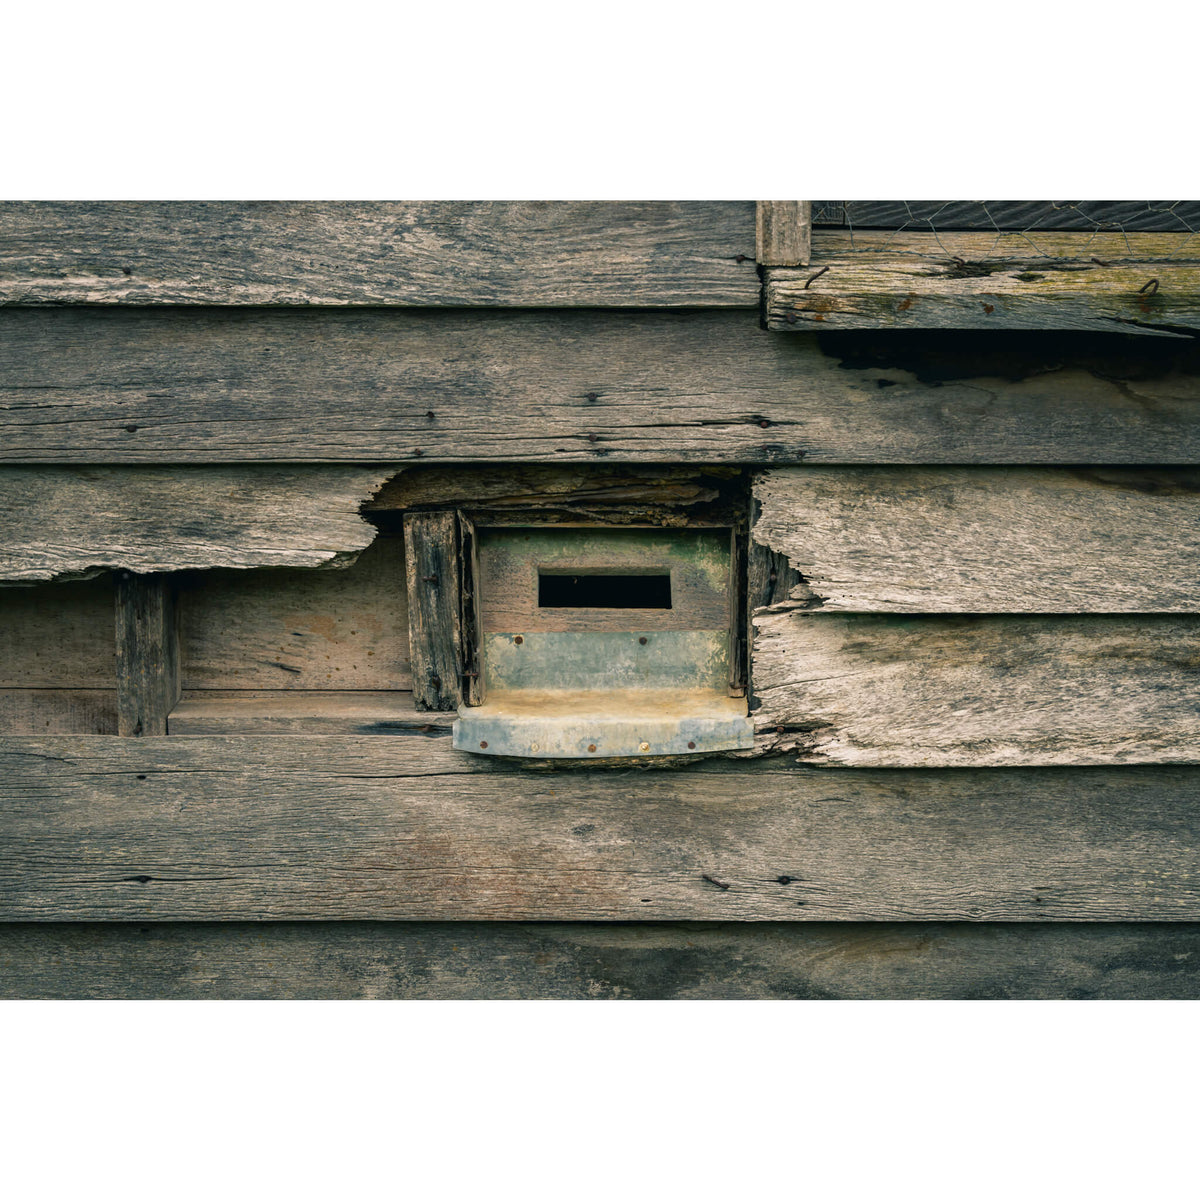 Mail Slot | The Post Office